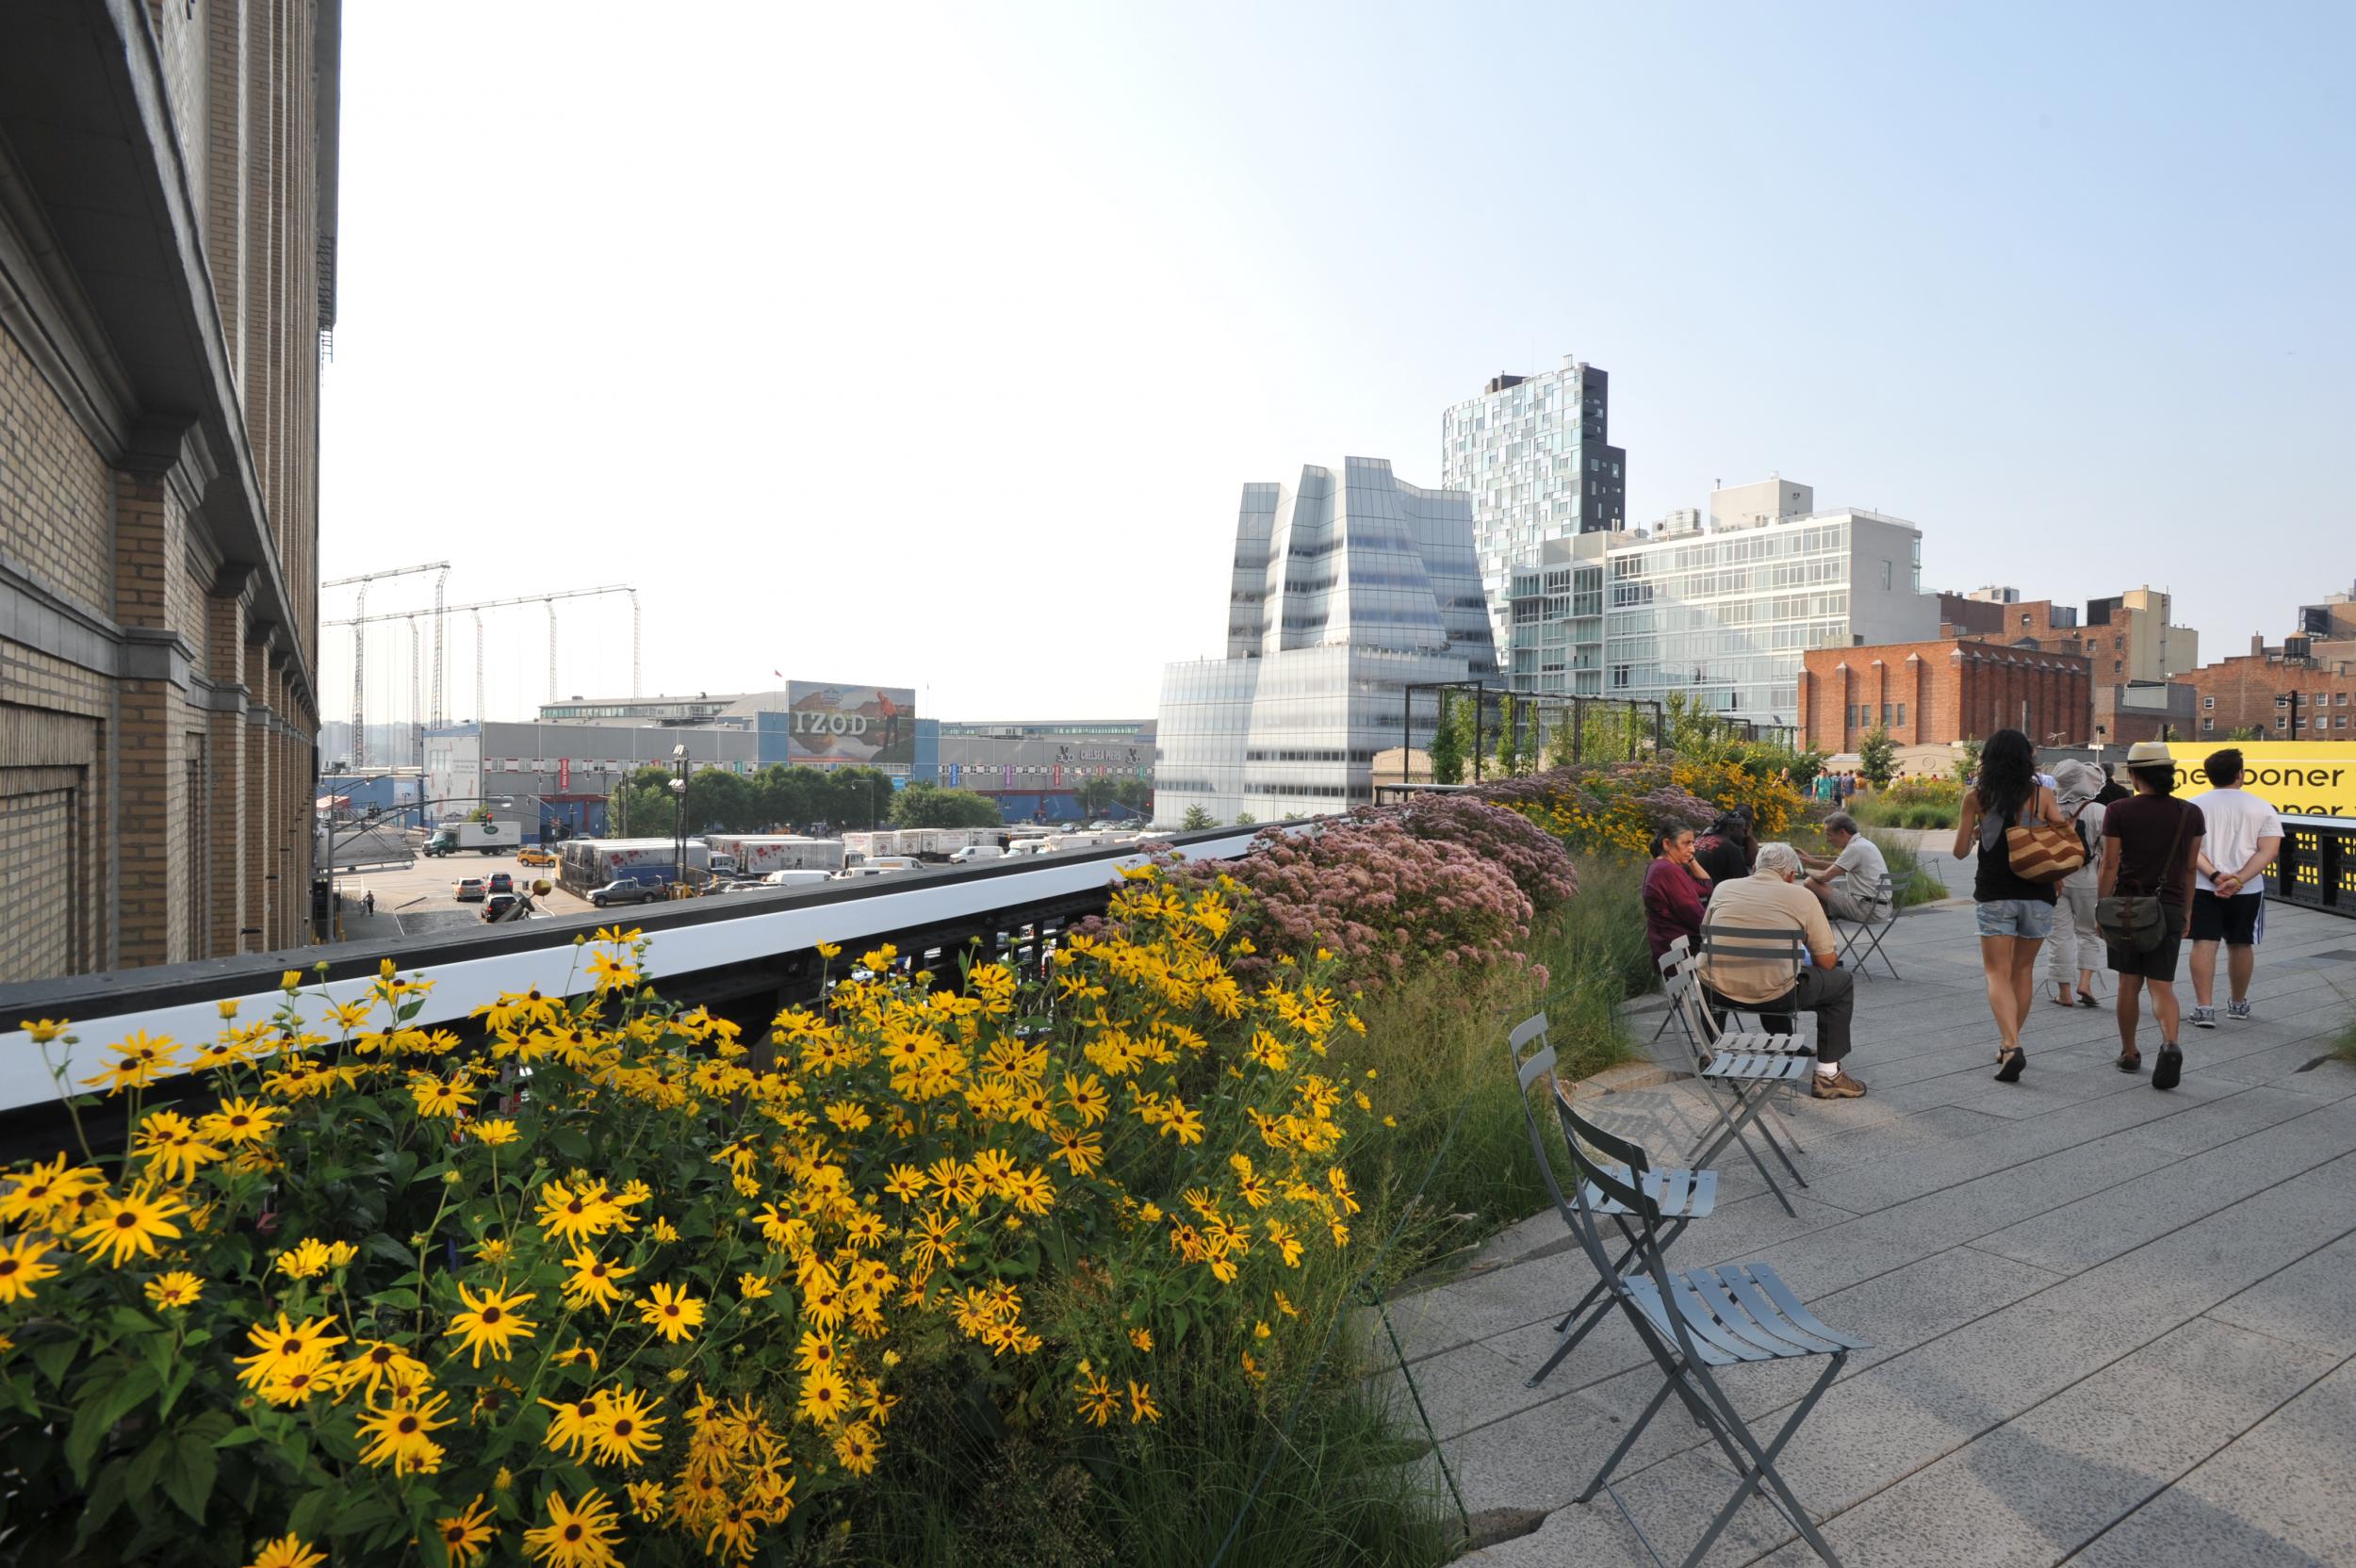 Enjoy stories and music on the High Line